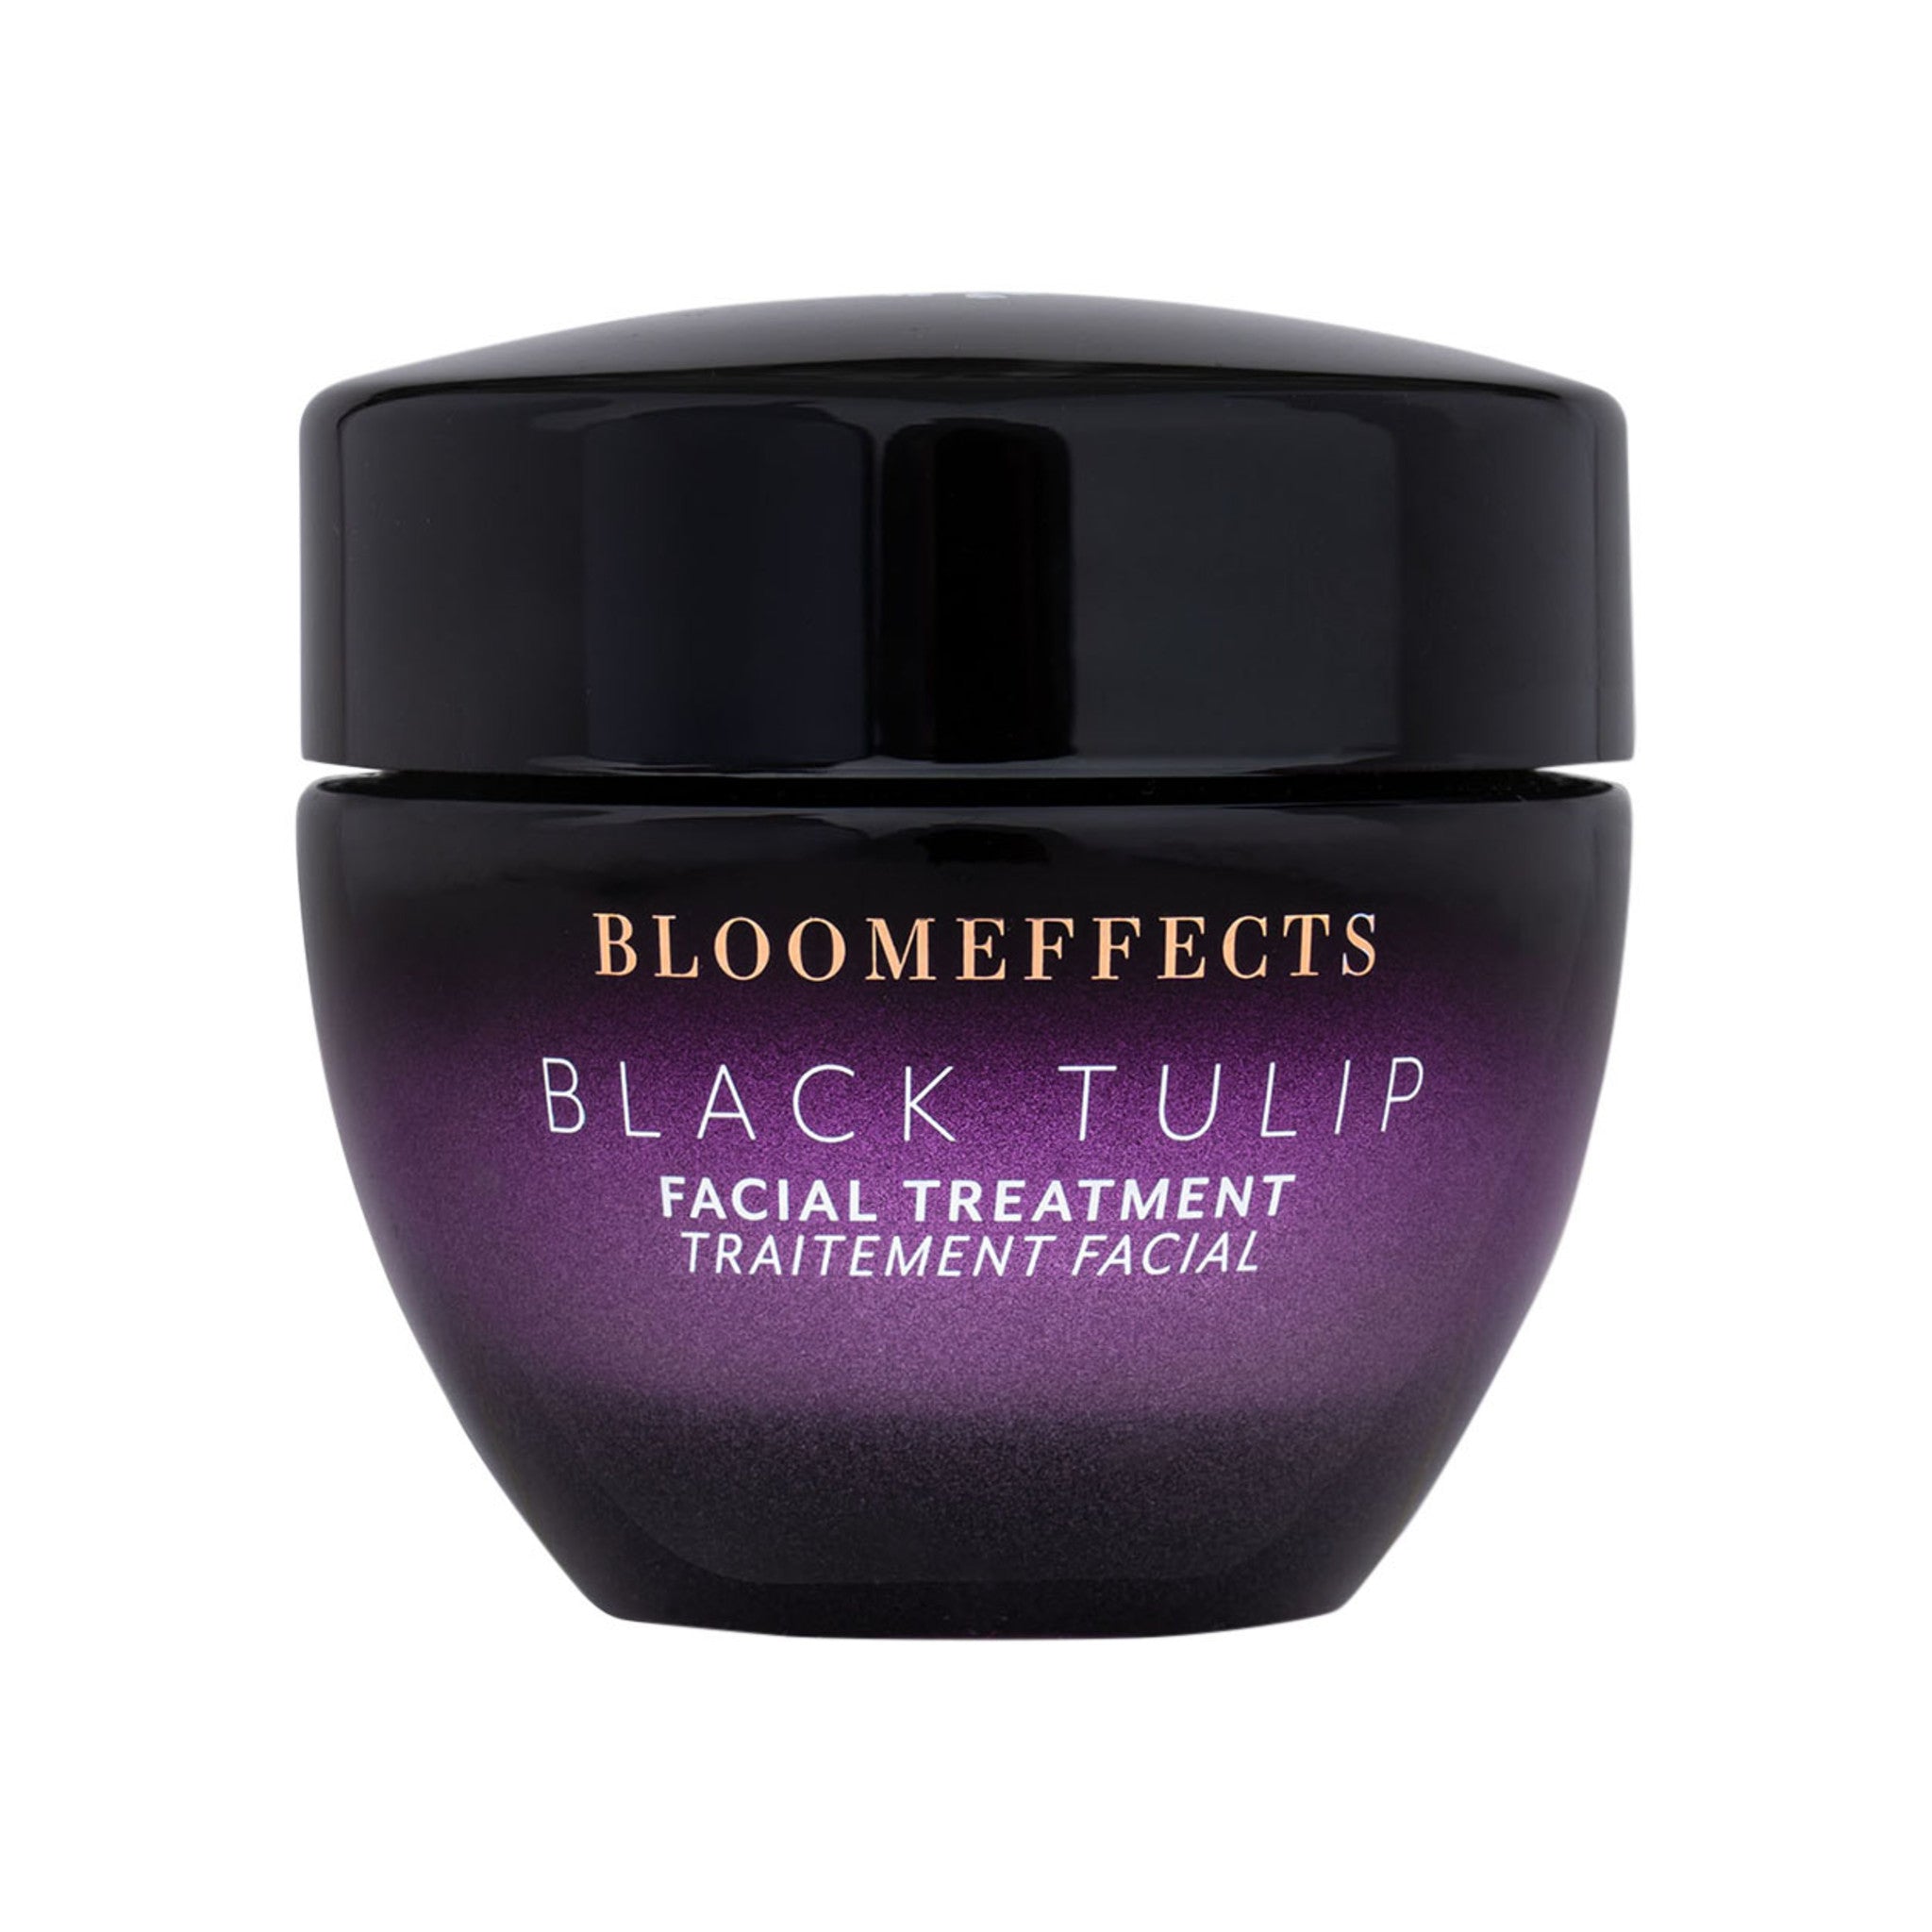 Bloomeffects Black Tulip Facial Treatment main image.